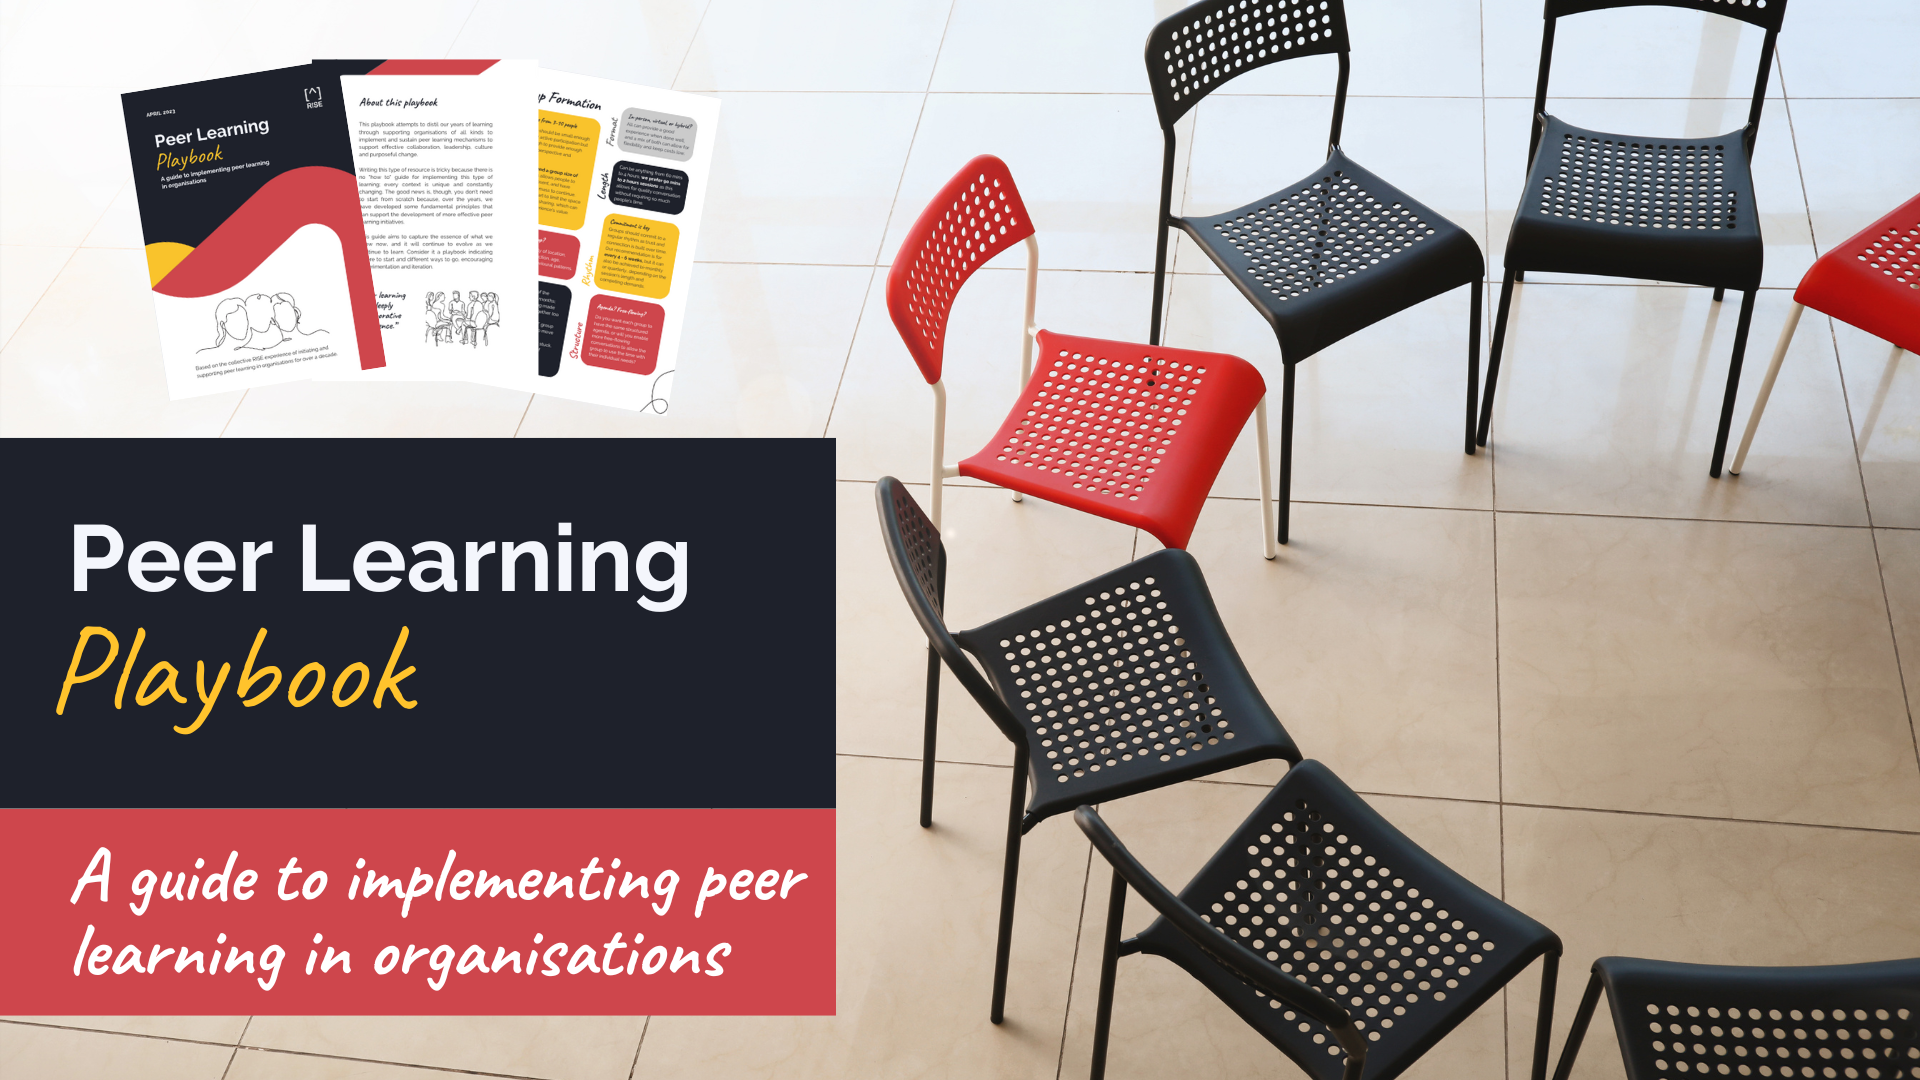 A guide to implementing peer learning in organisations